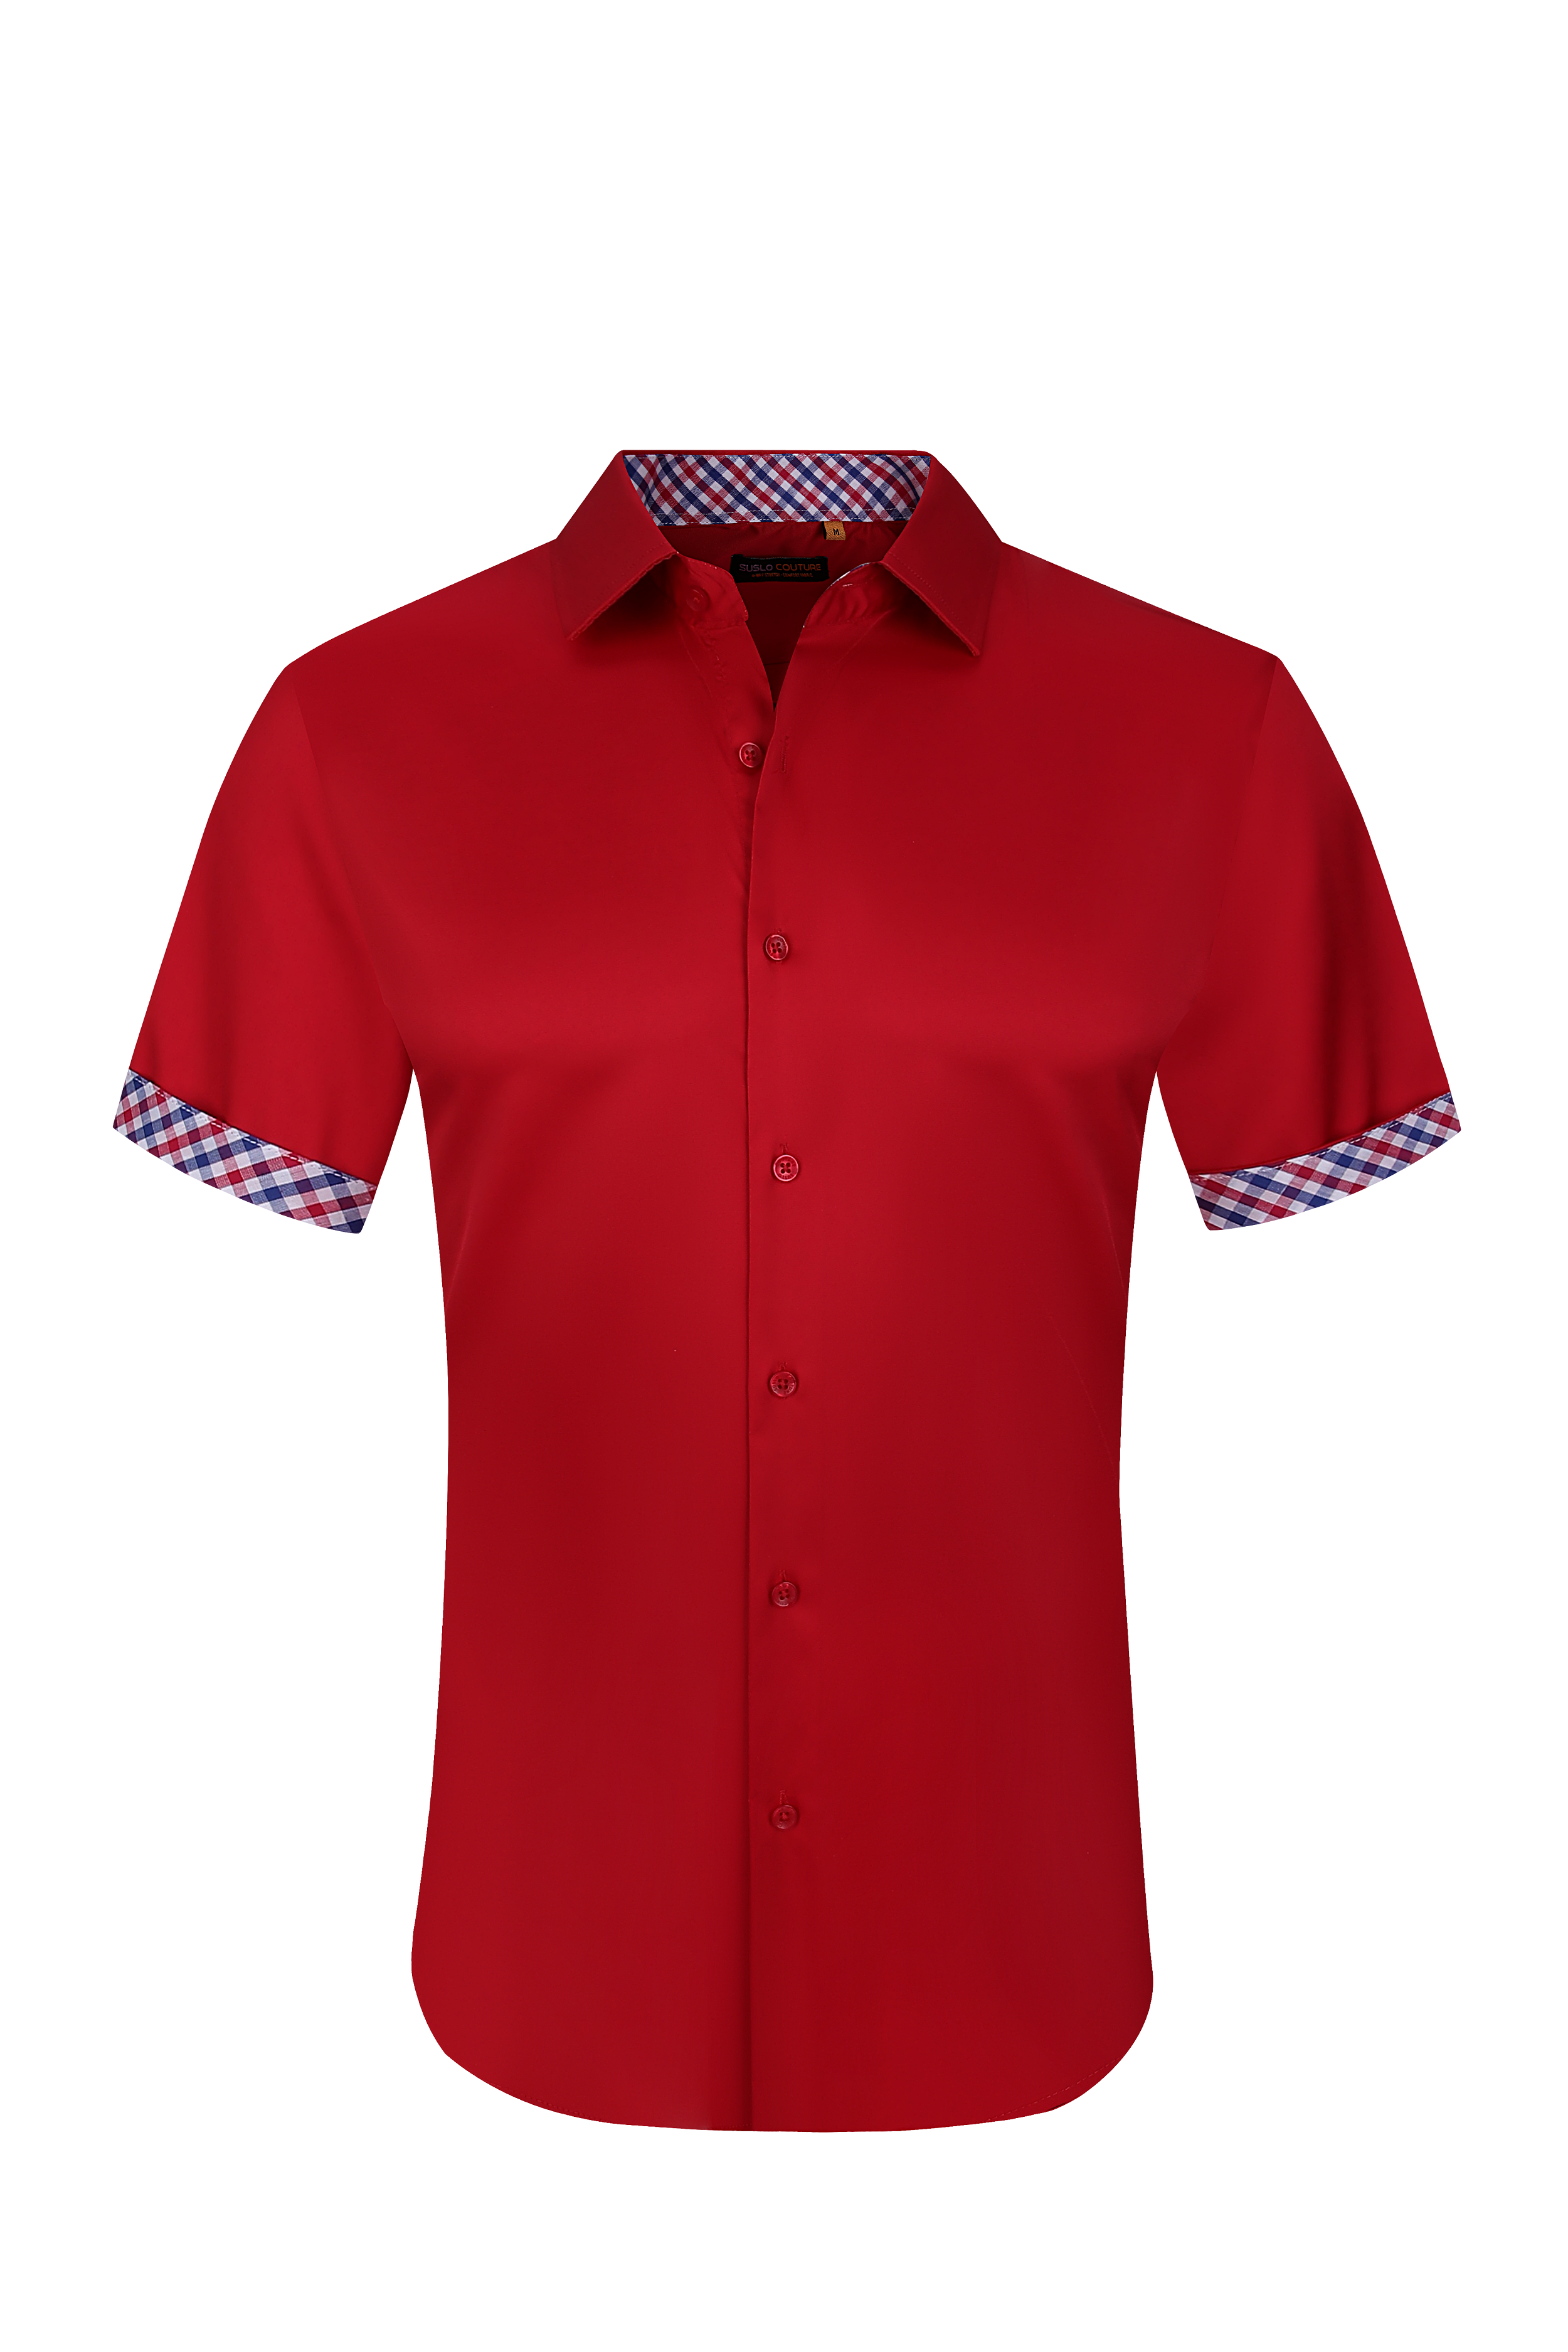 Suslo Solid 4 Way Stretch Short Sleeve Shirt - Red